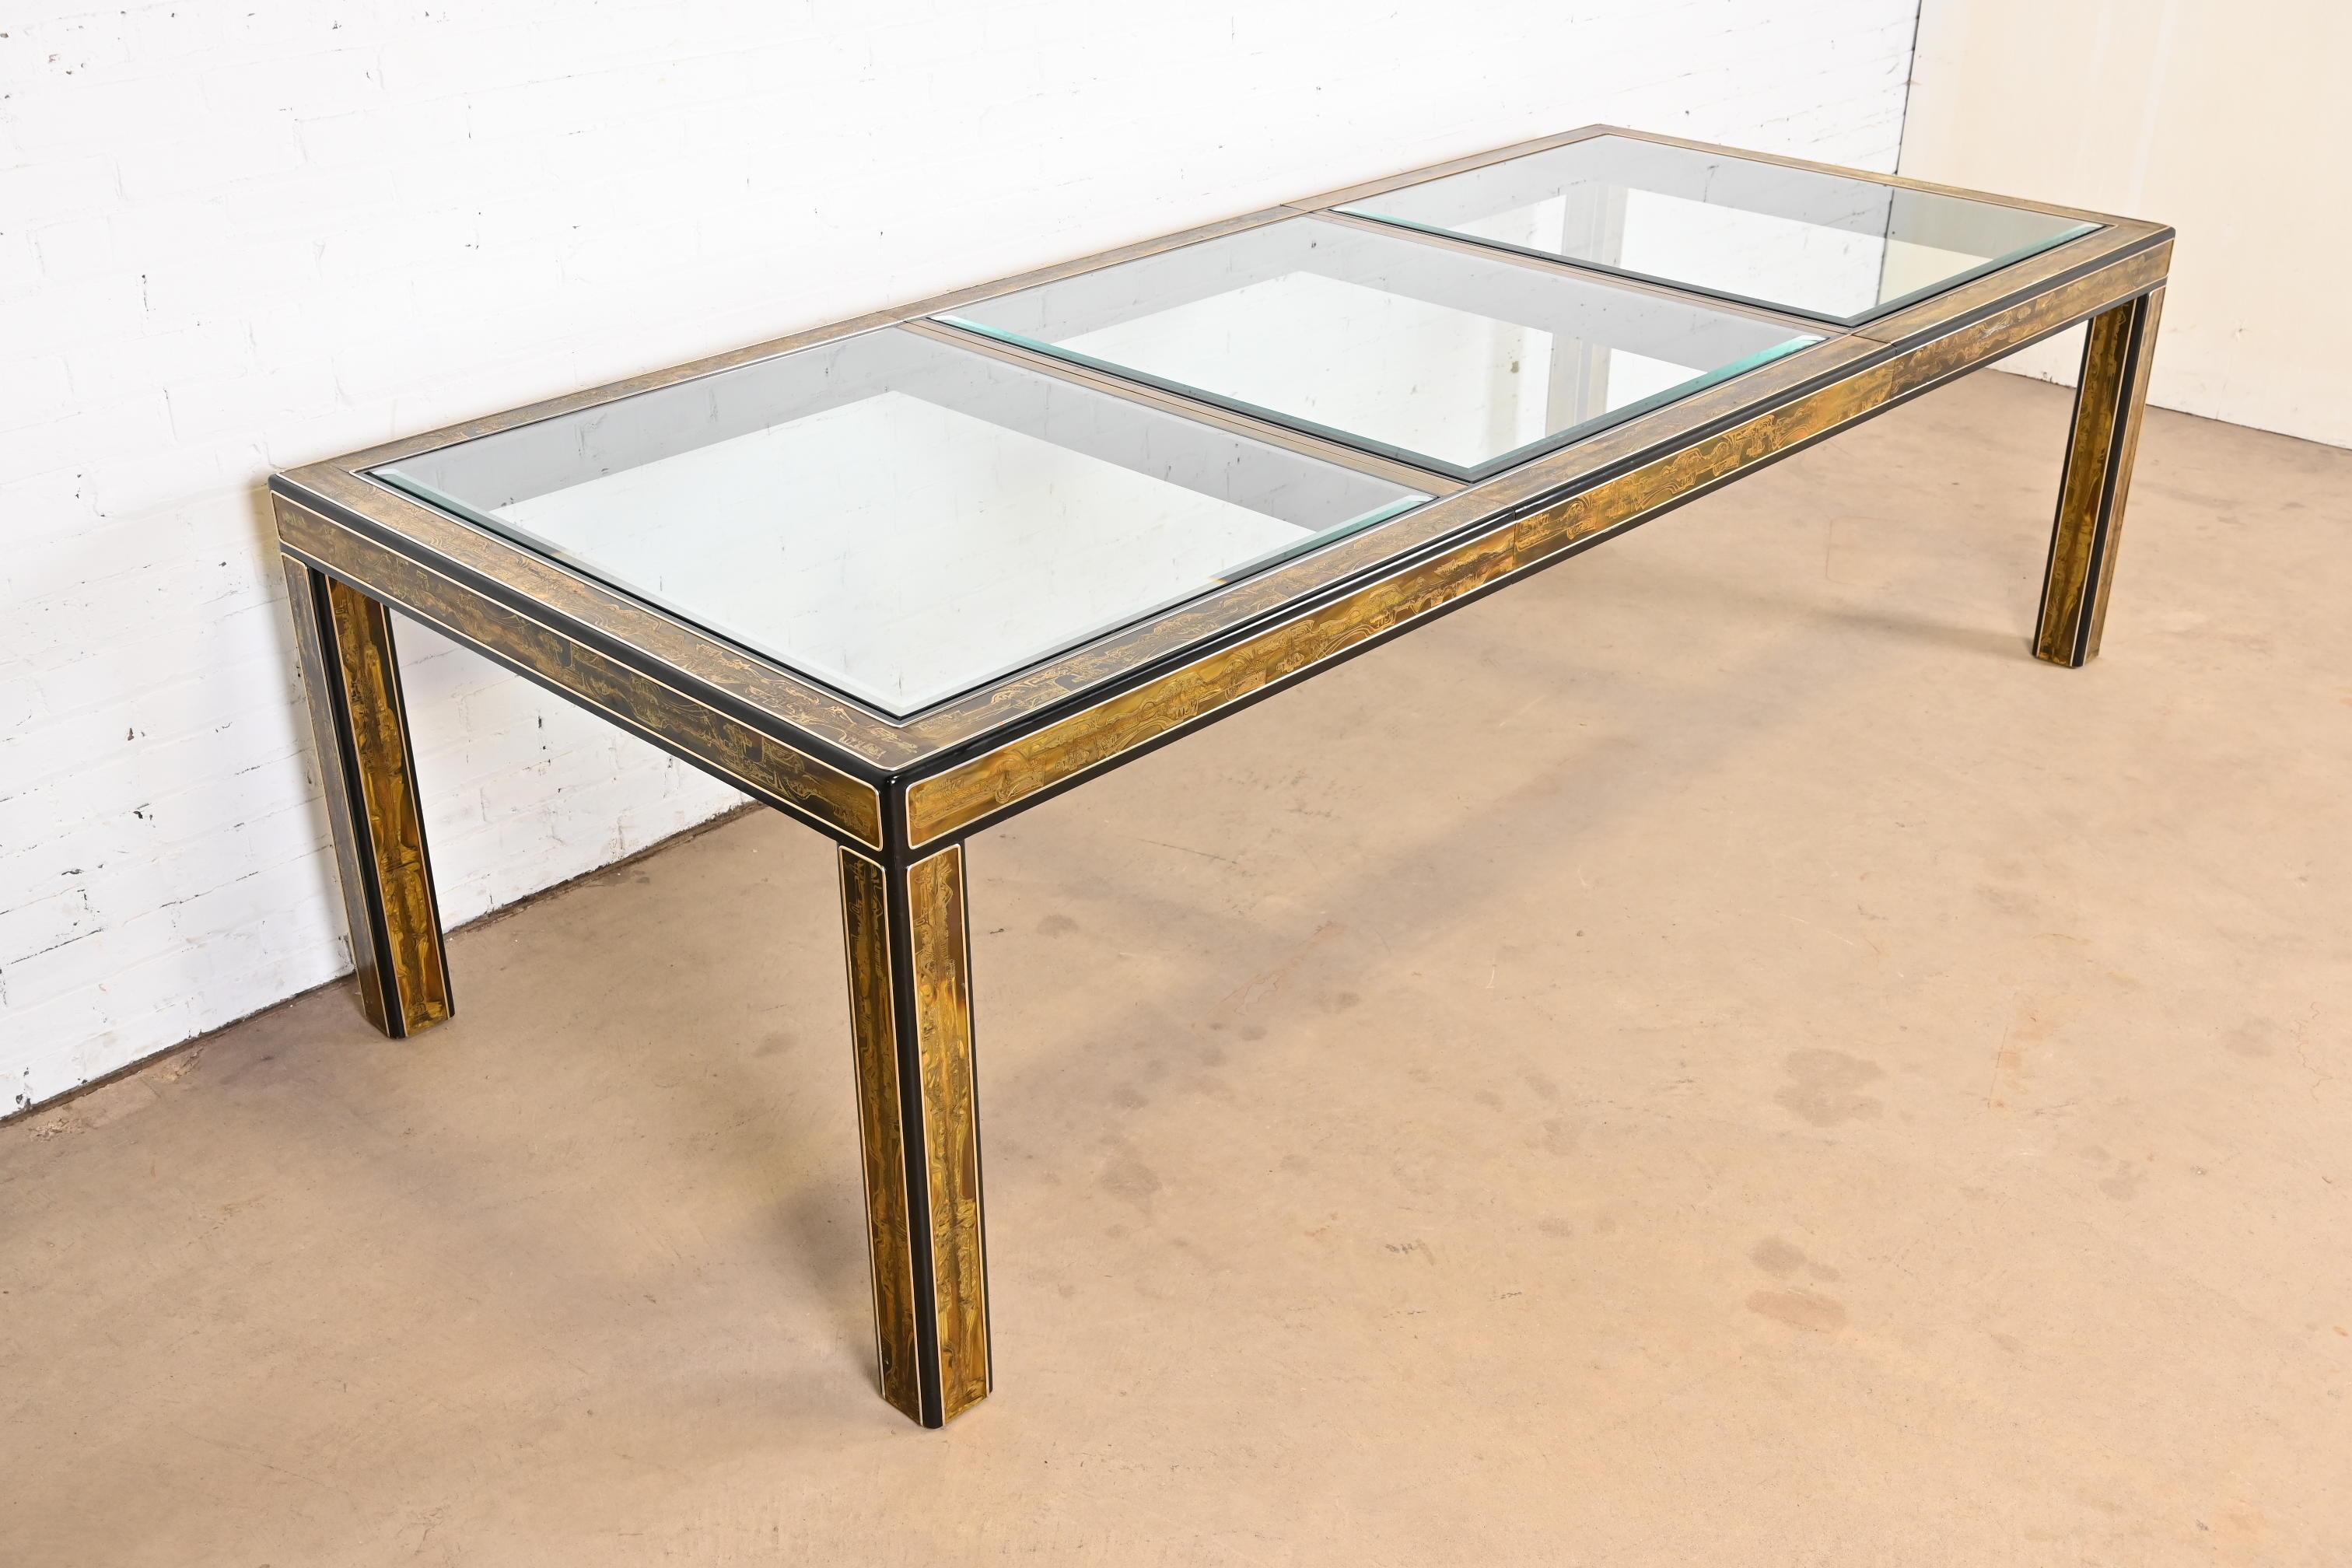 American Bernhard Rohne for Mastercraft Acid Etched Brass Extension Dining Table, 1970s For Sale